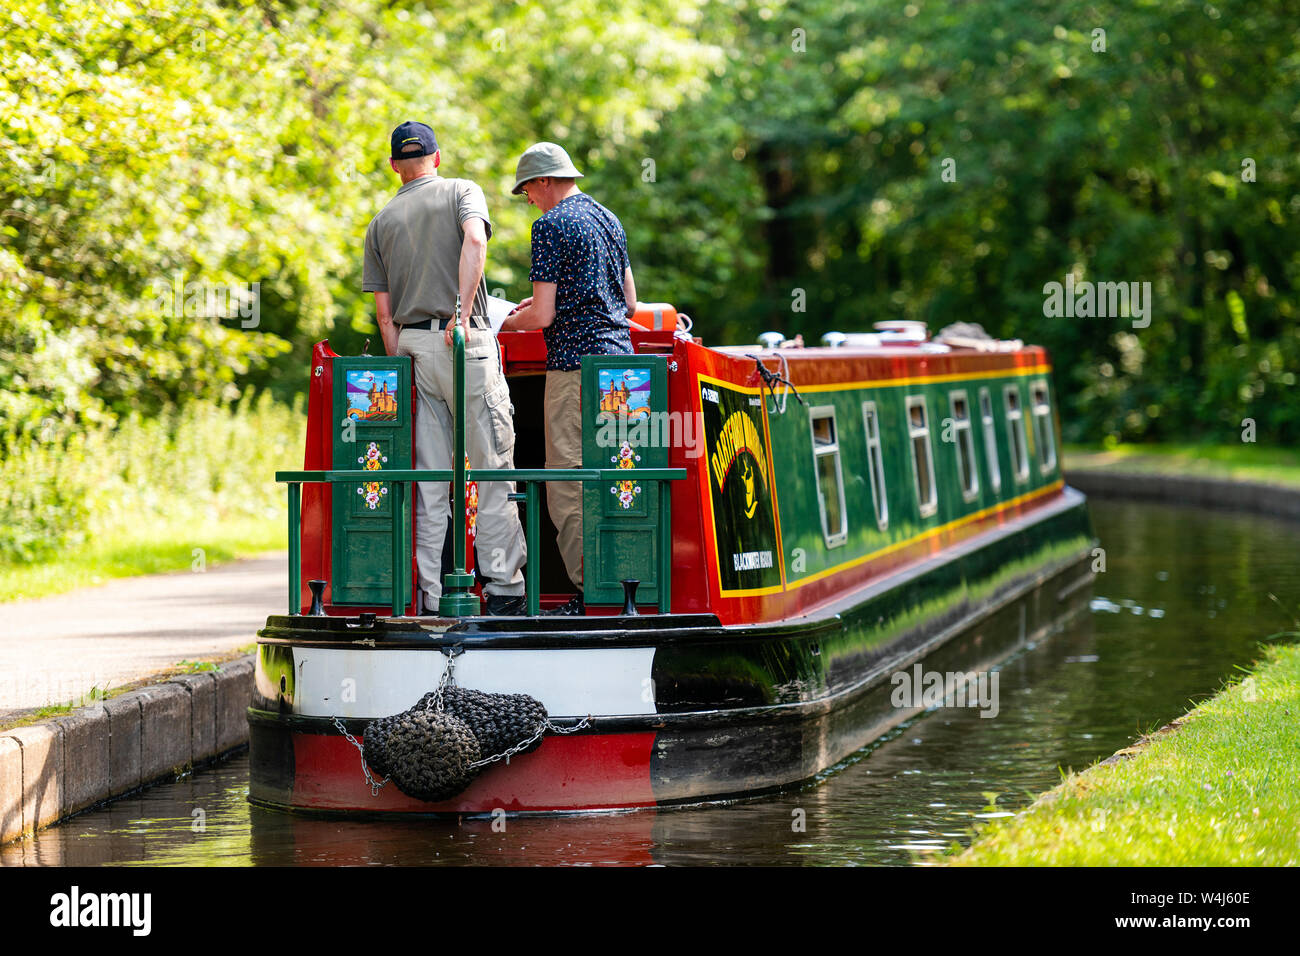 Rear view of two men on the stern of a narrow boat navigating along a canal on a sunny summer day, UK. Stock Photo